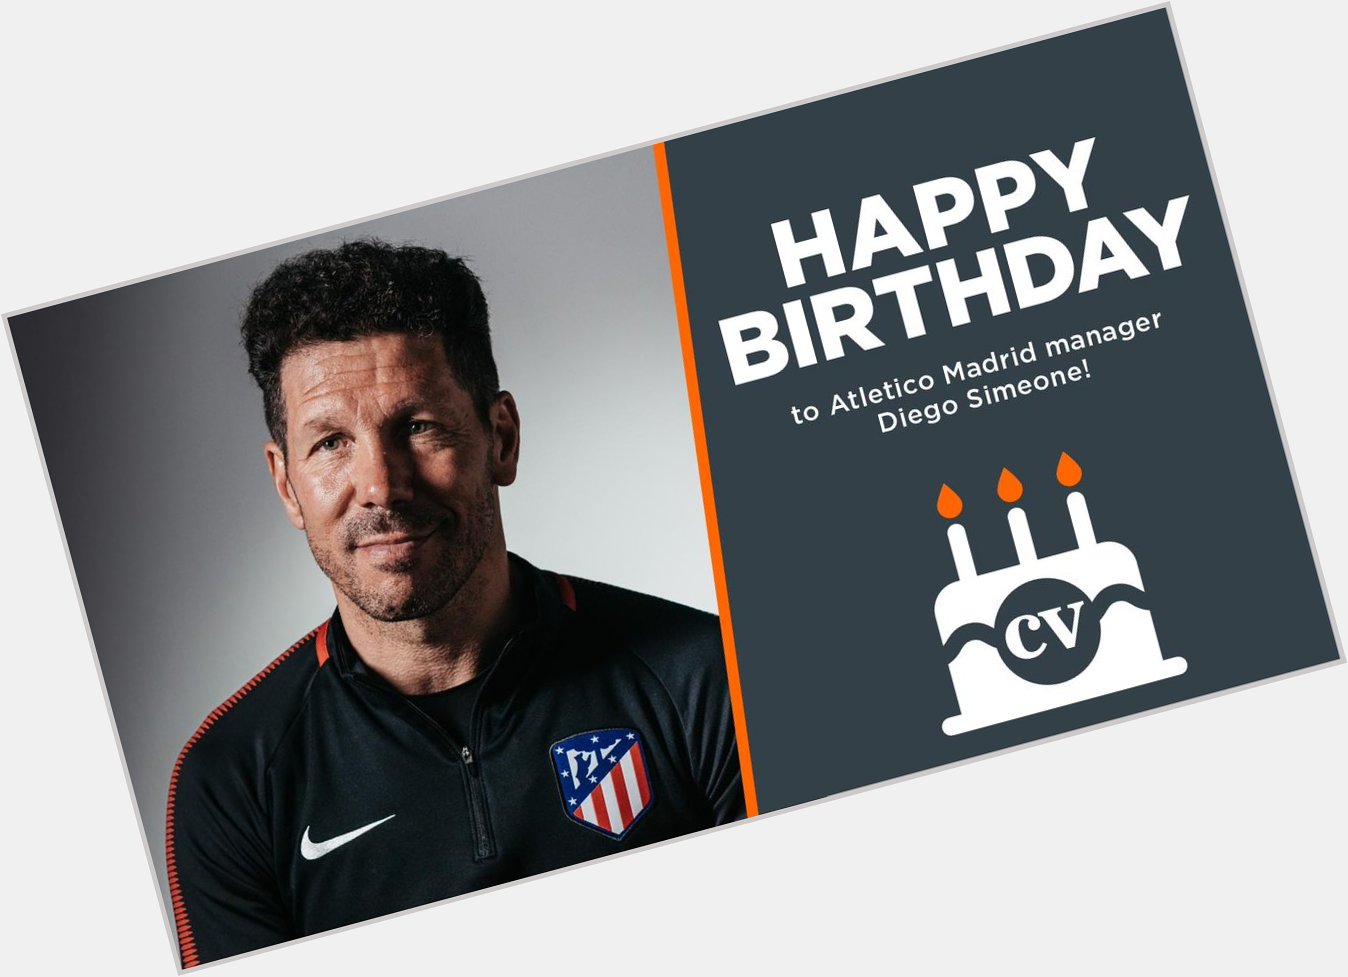  Happy birthday to Atletico Madrid manager Diego  